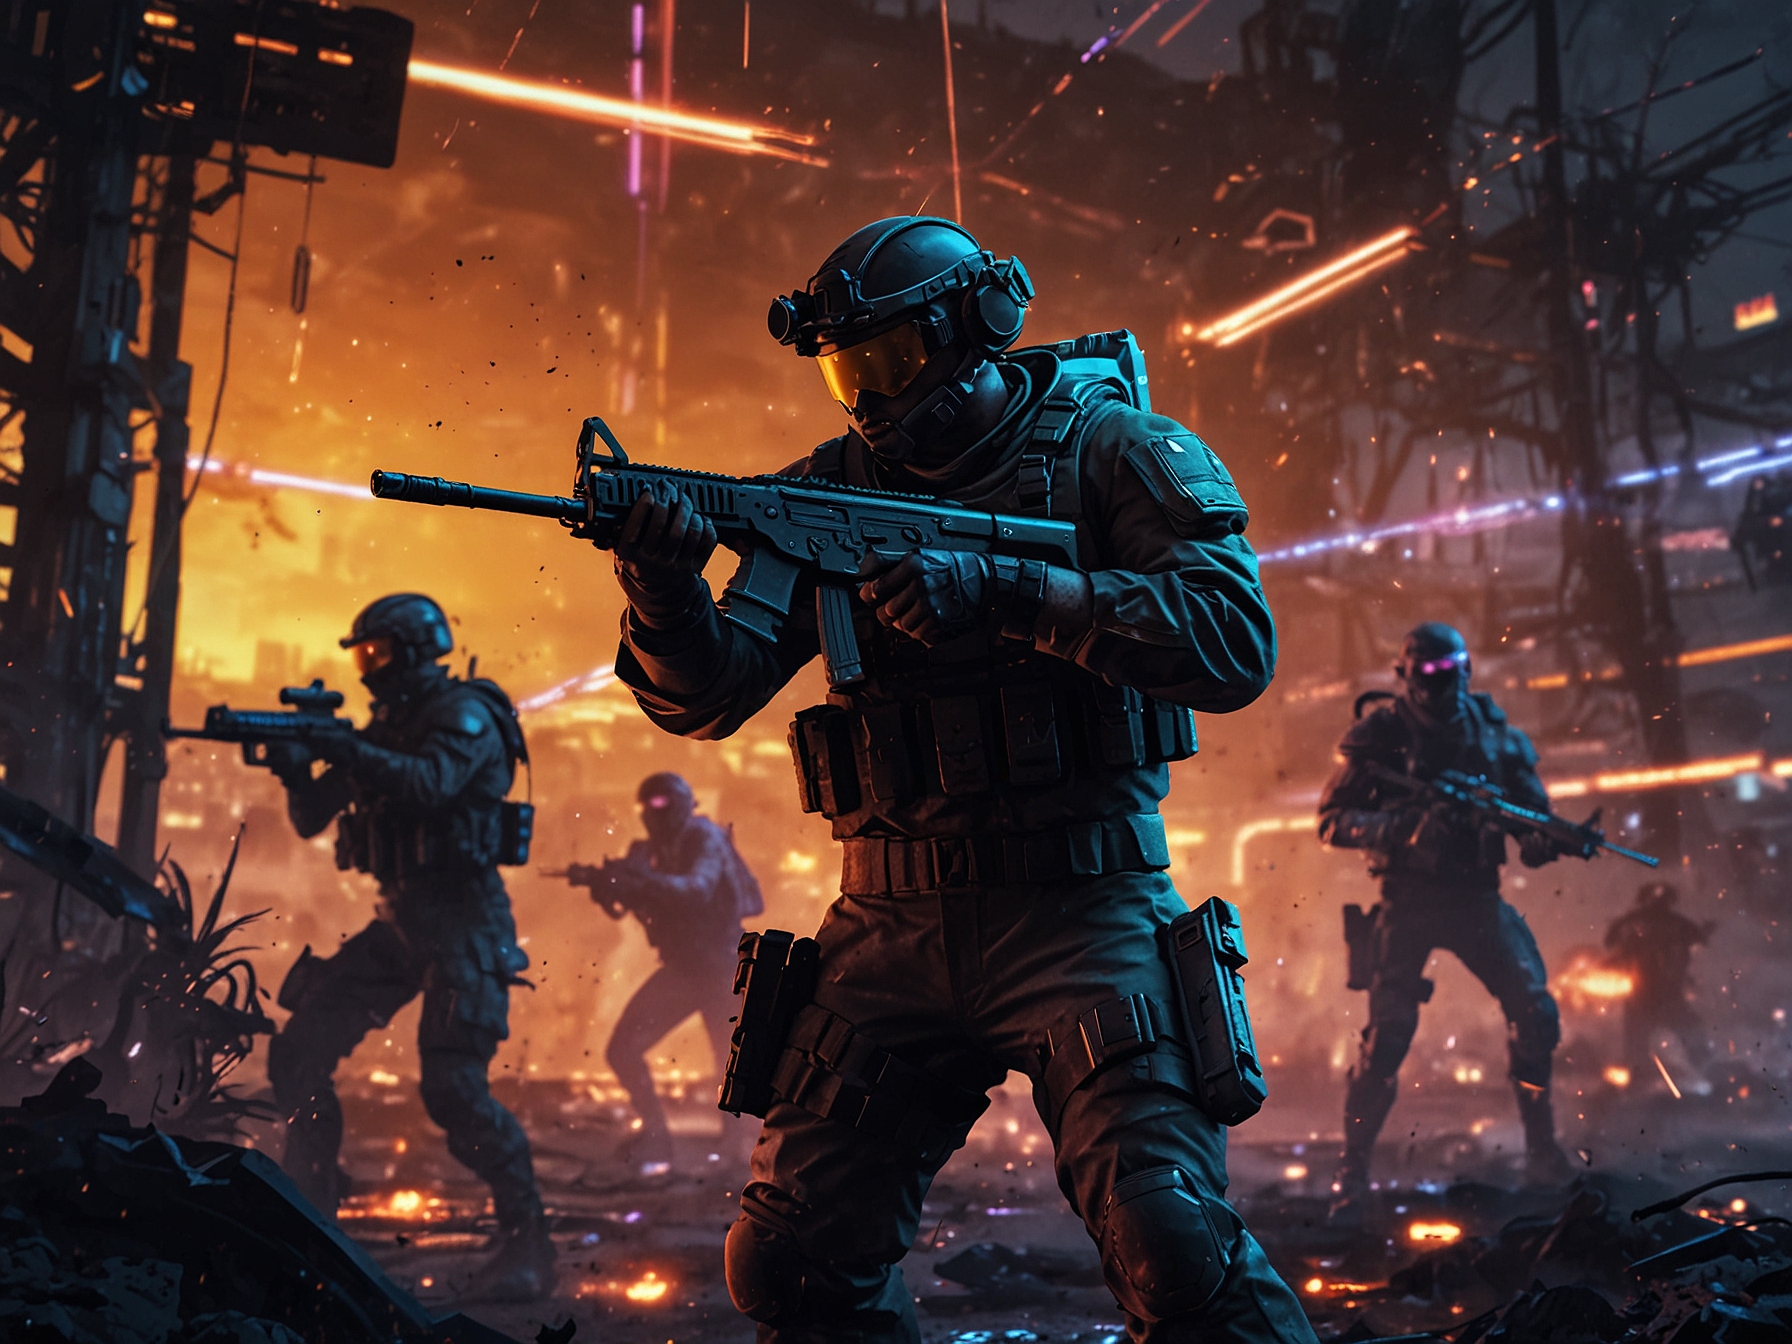 An exhilarating image of a futuristic, neon-lit battlefield from Call of Duty: Mobile Season 5: Digital Dusk. Players are seen engaging in intense combat using high-tech weaponry under glowing cyberpunk aesthetics.